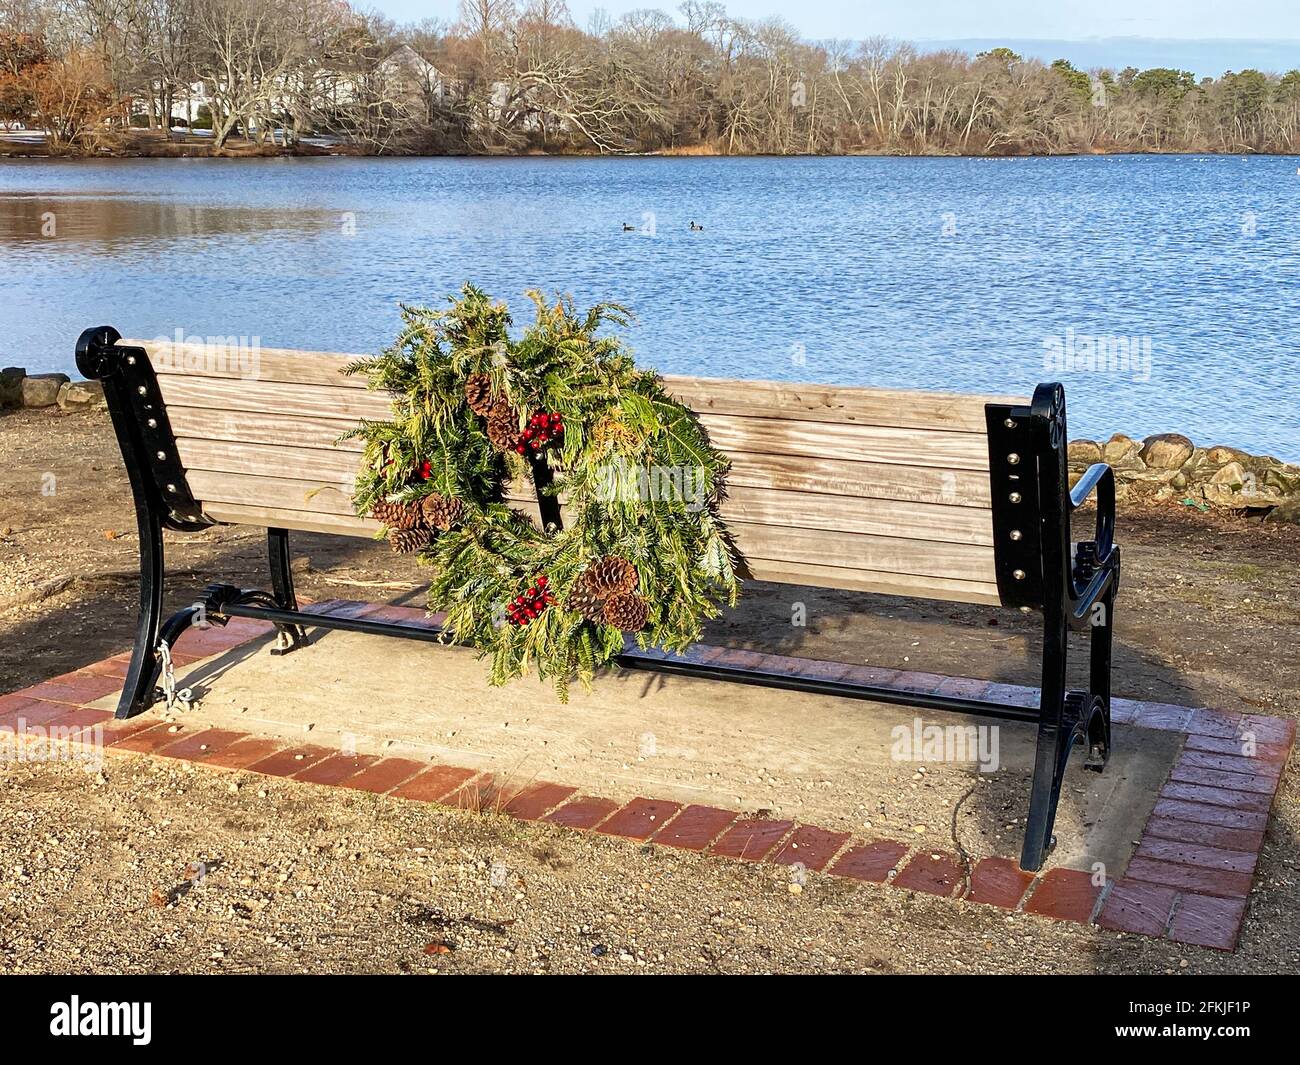 Belmont lake state park bench with a holiday wreath on the back overlooking the lake in December. Stock Photo